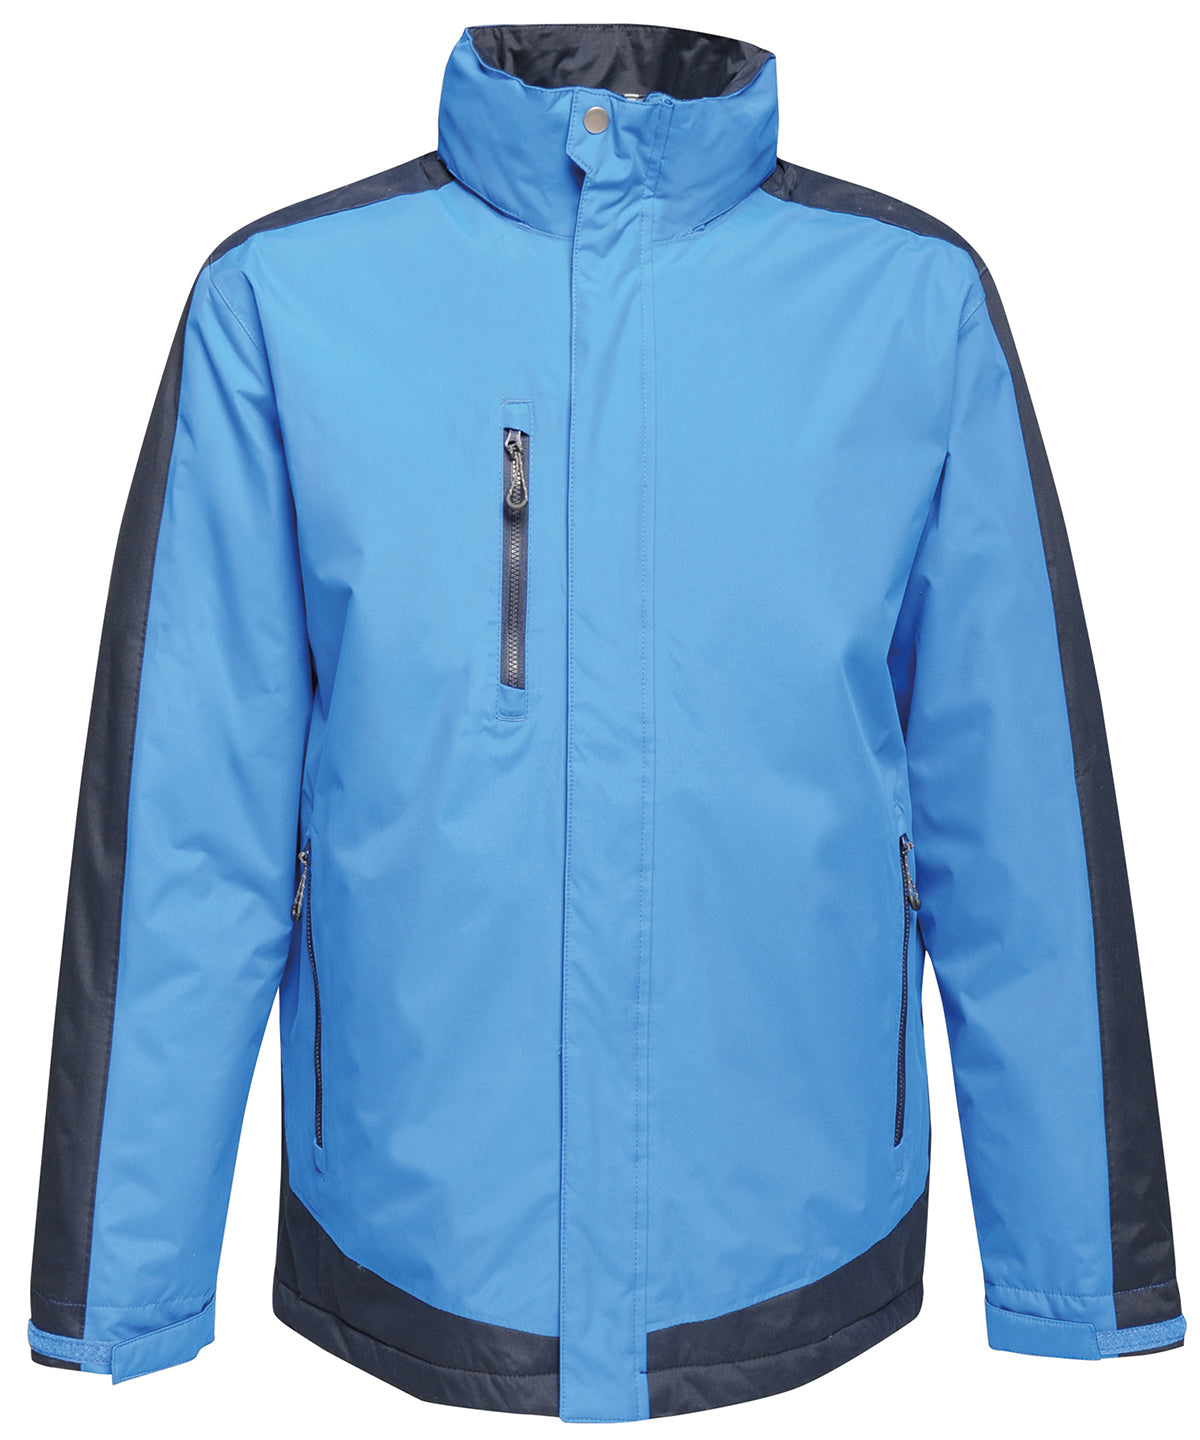 Contrast insulated jacket